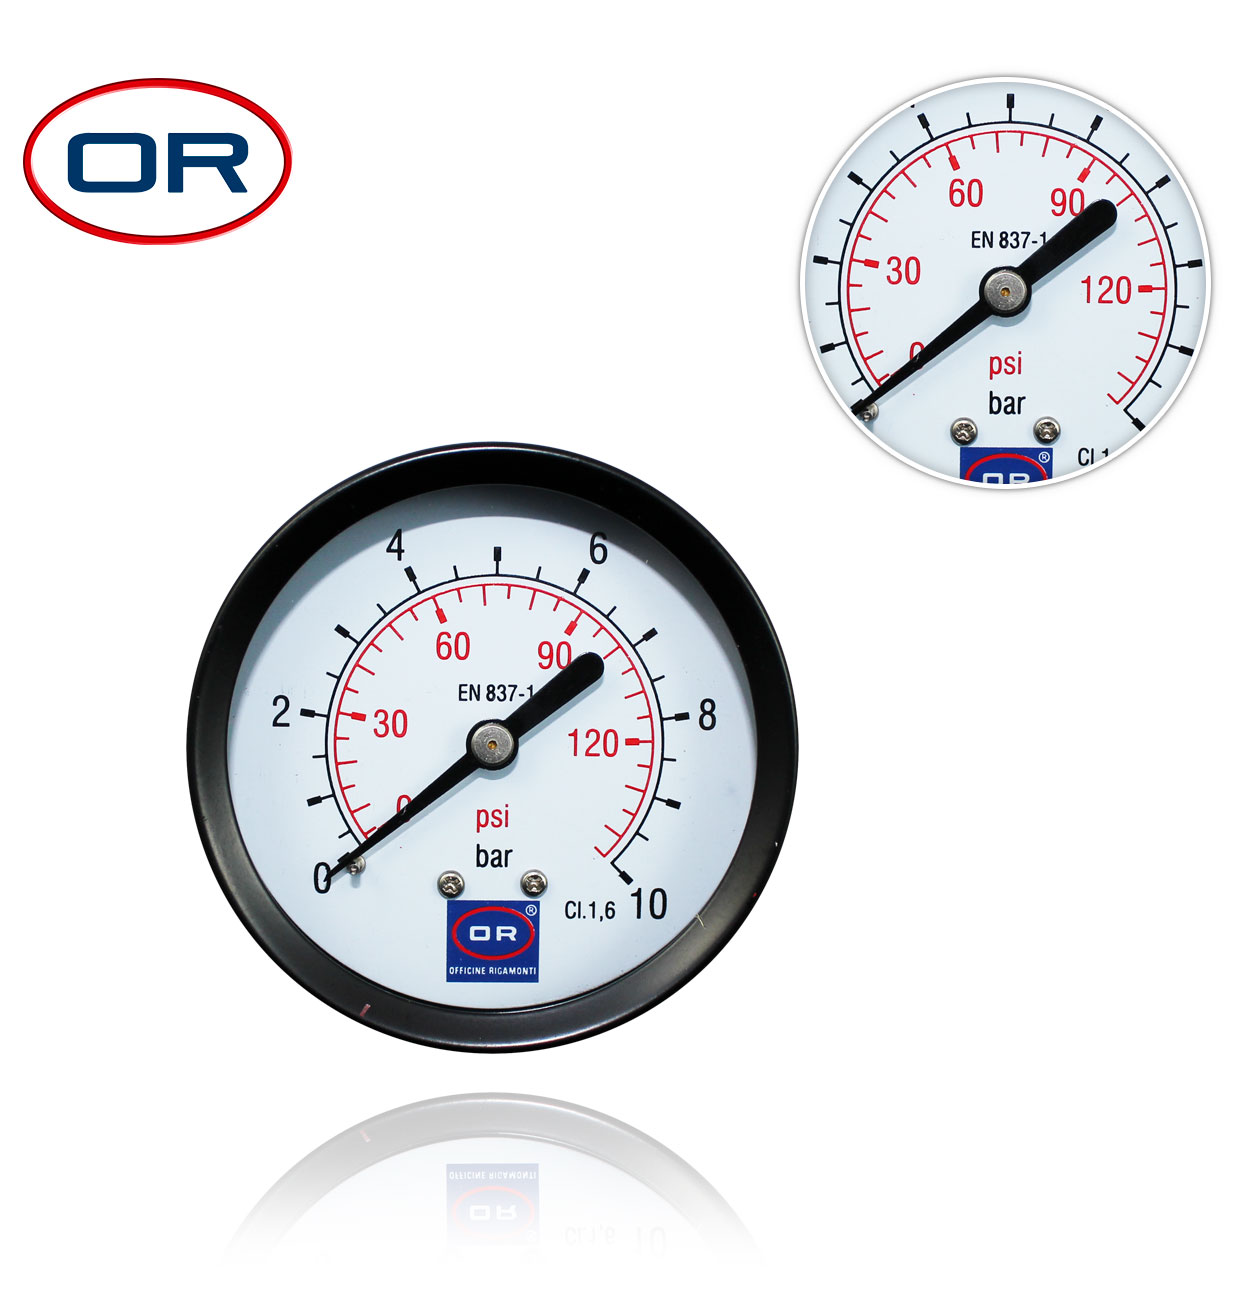 D63 0-10bar R1/4" REAR MANOMETER WITH ABS O-RING